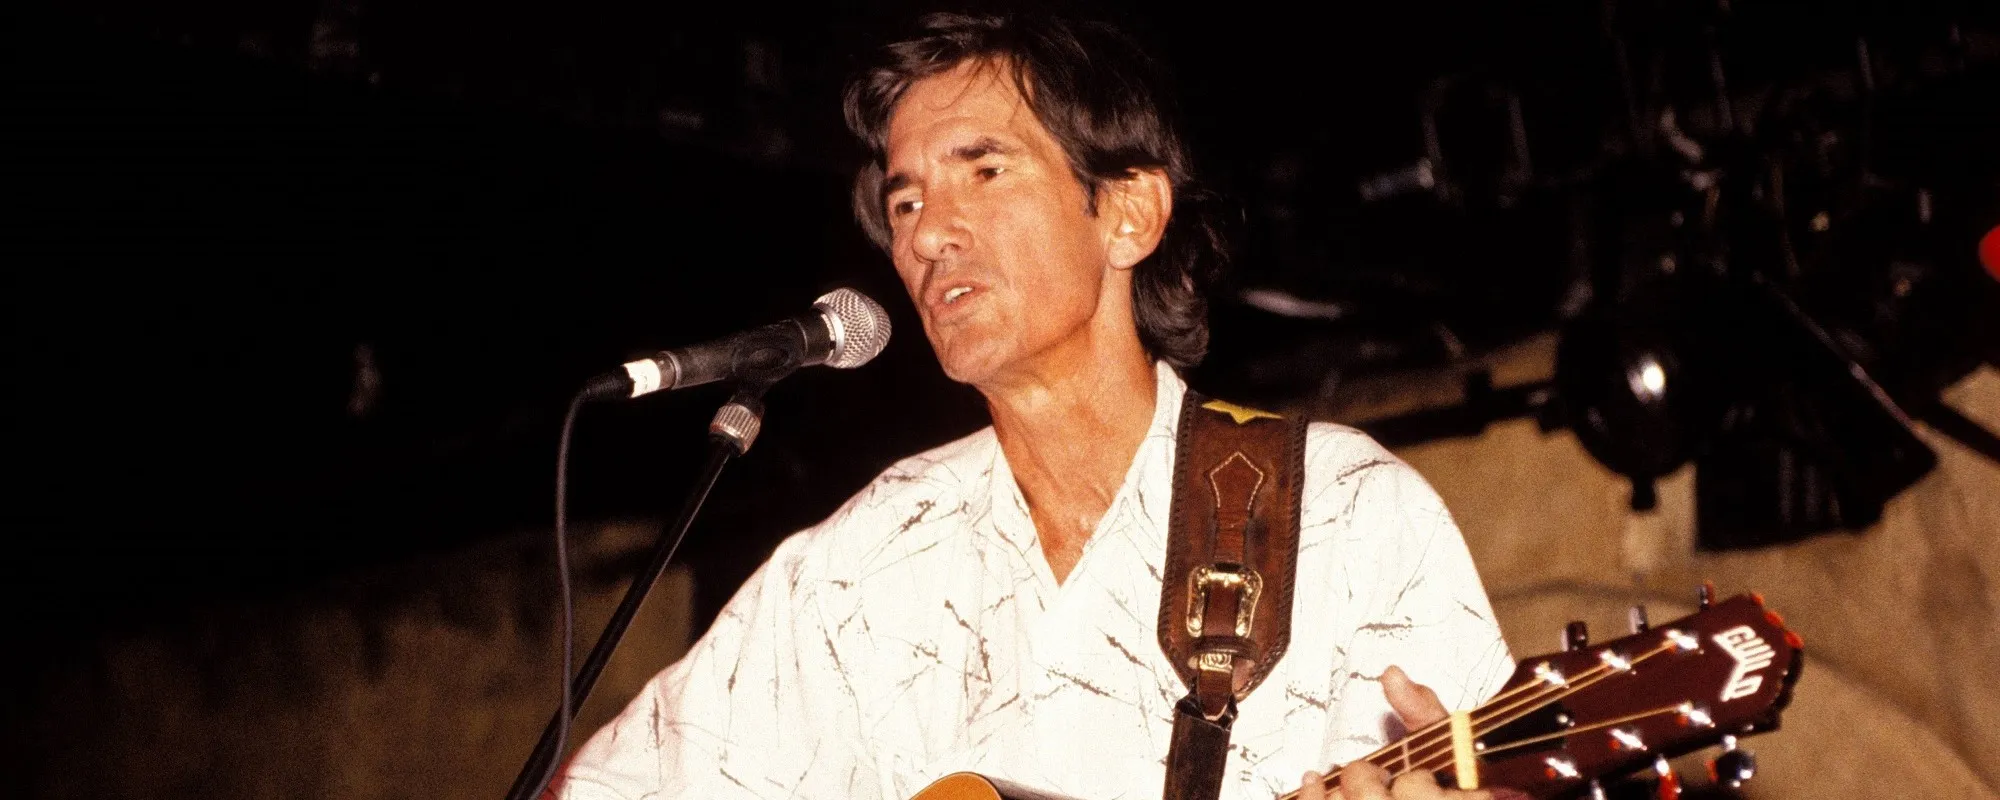 5 Facts You Might Not Know About Townes Van Zandt